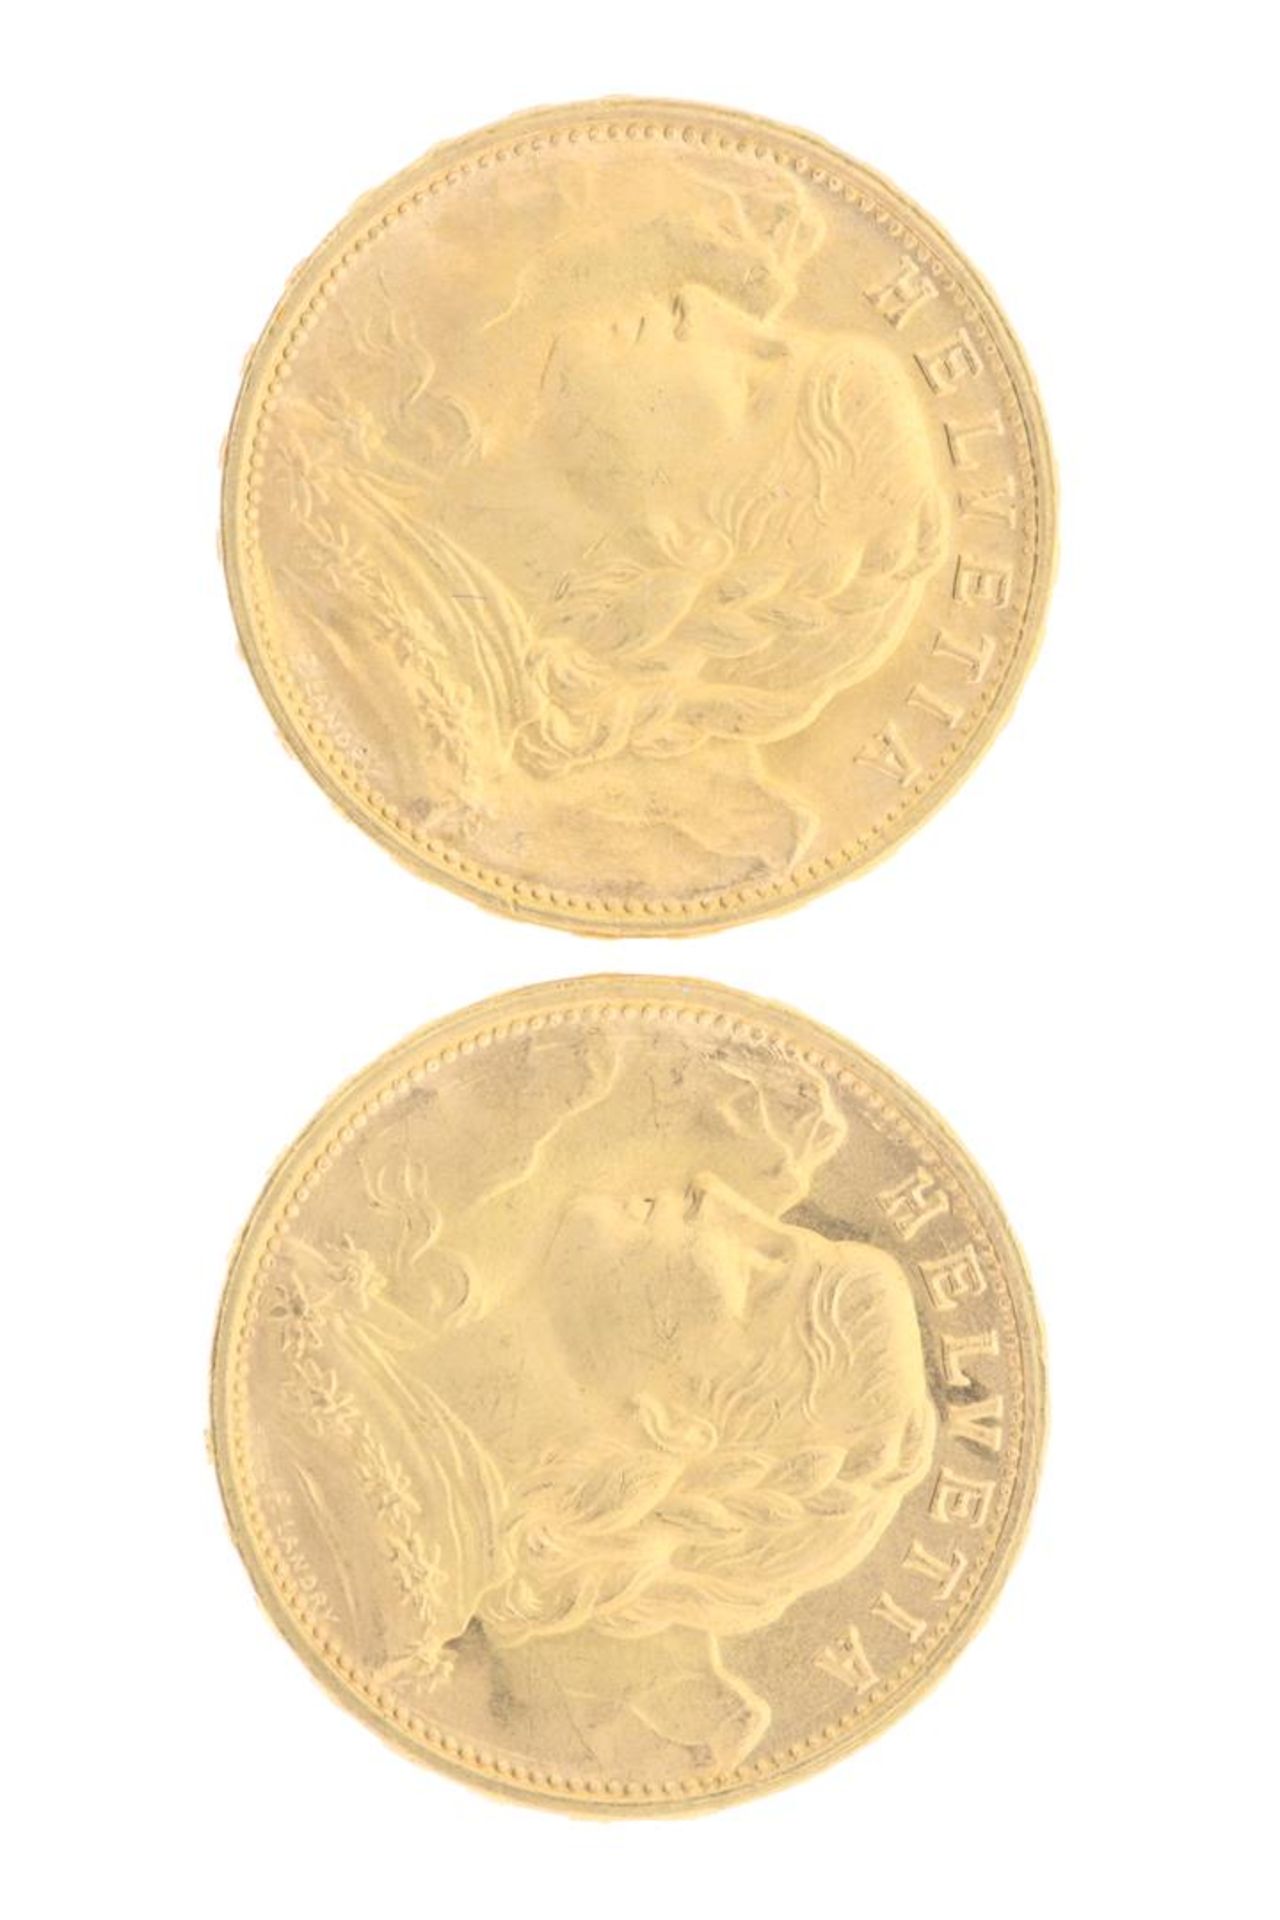 2 gold 20 Franc pieces of Helvetia - Image 2 of 2